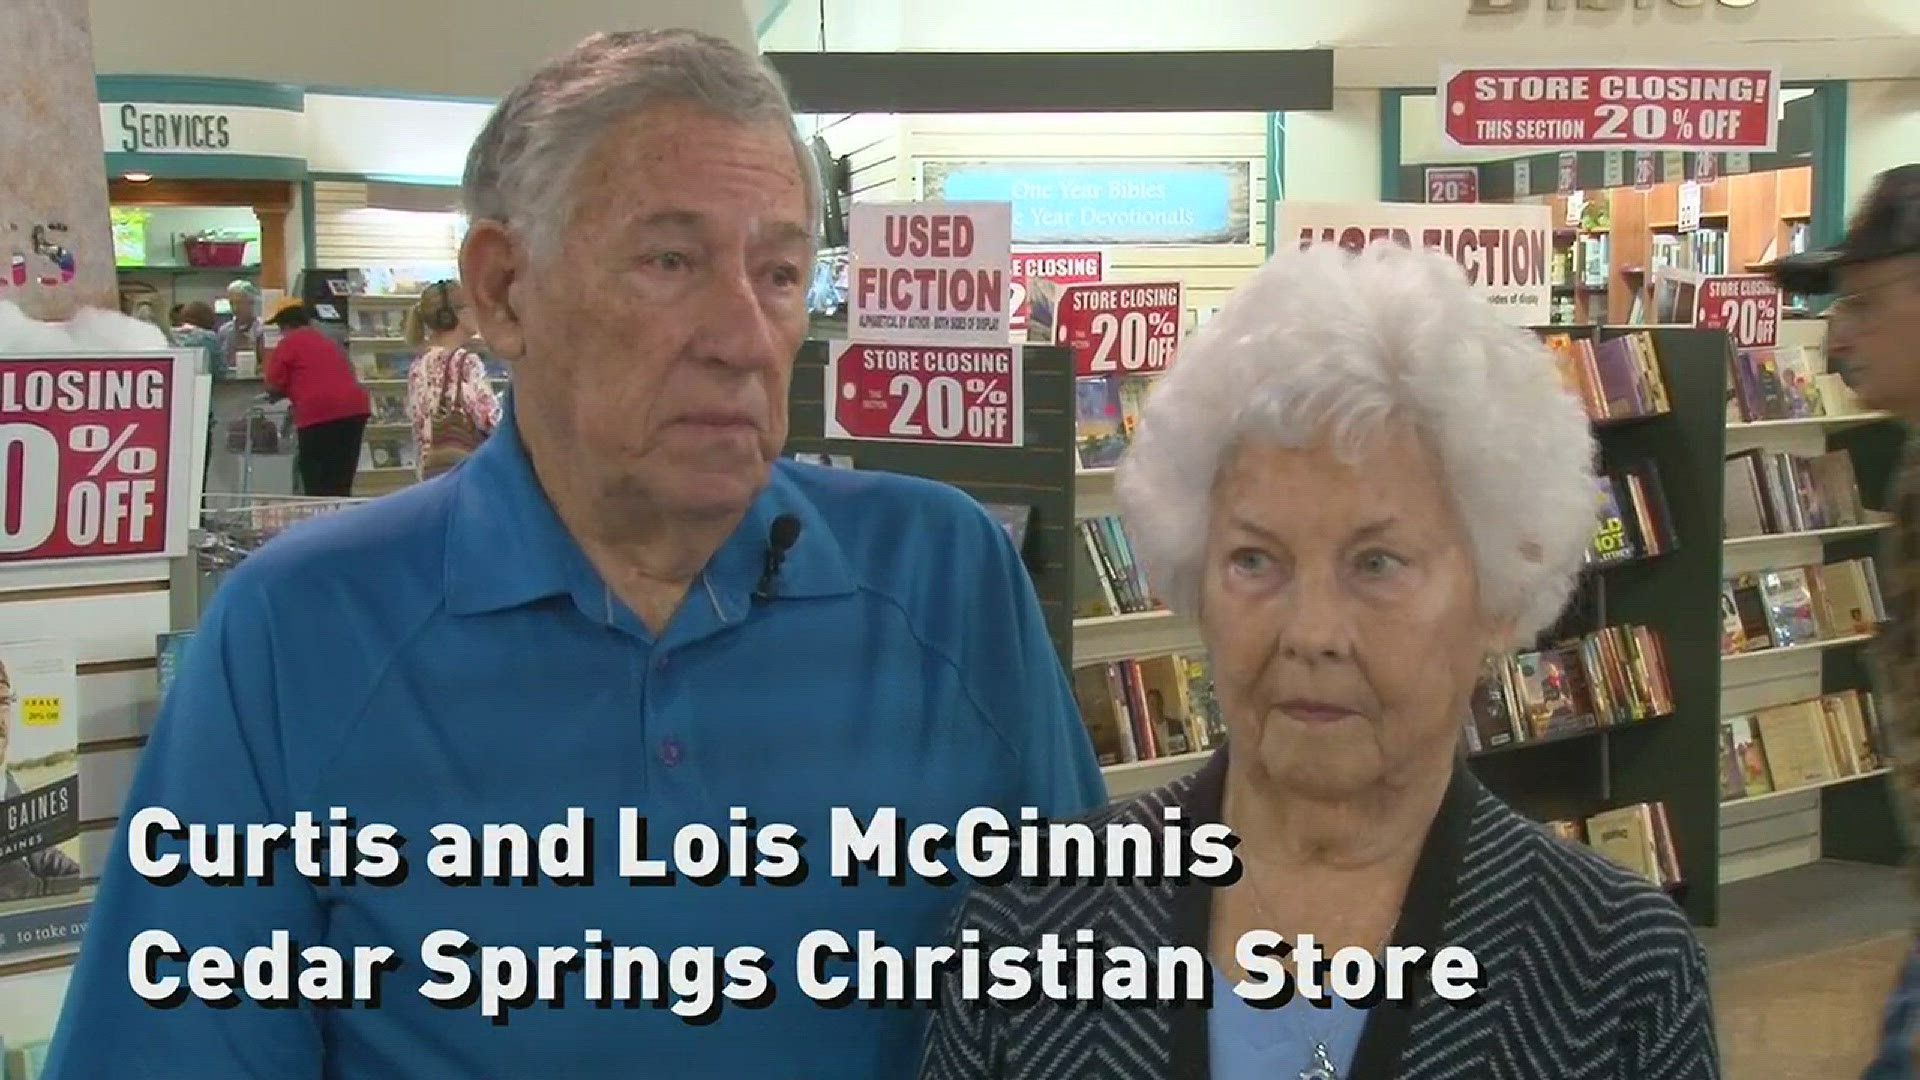 Curtis and Lois McGinnis opened the store 42 years ago. They have been blessed over the years but the internet has simply cut down store traffic too much for it to remain open.